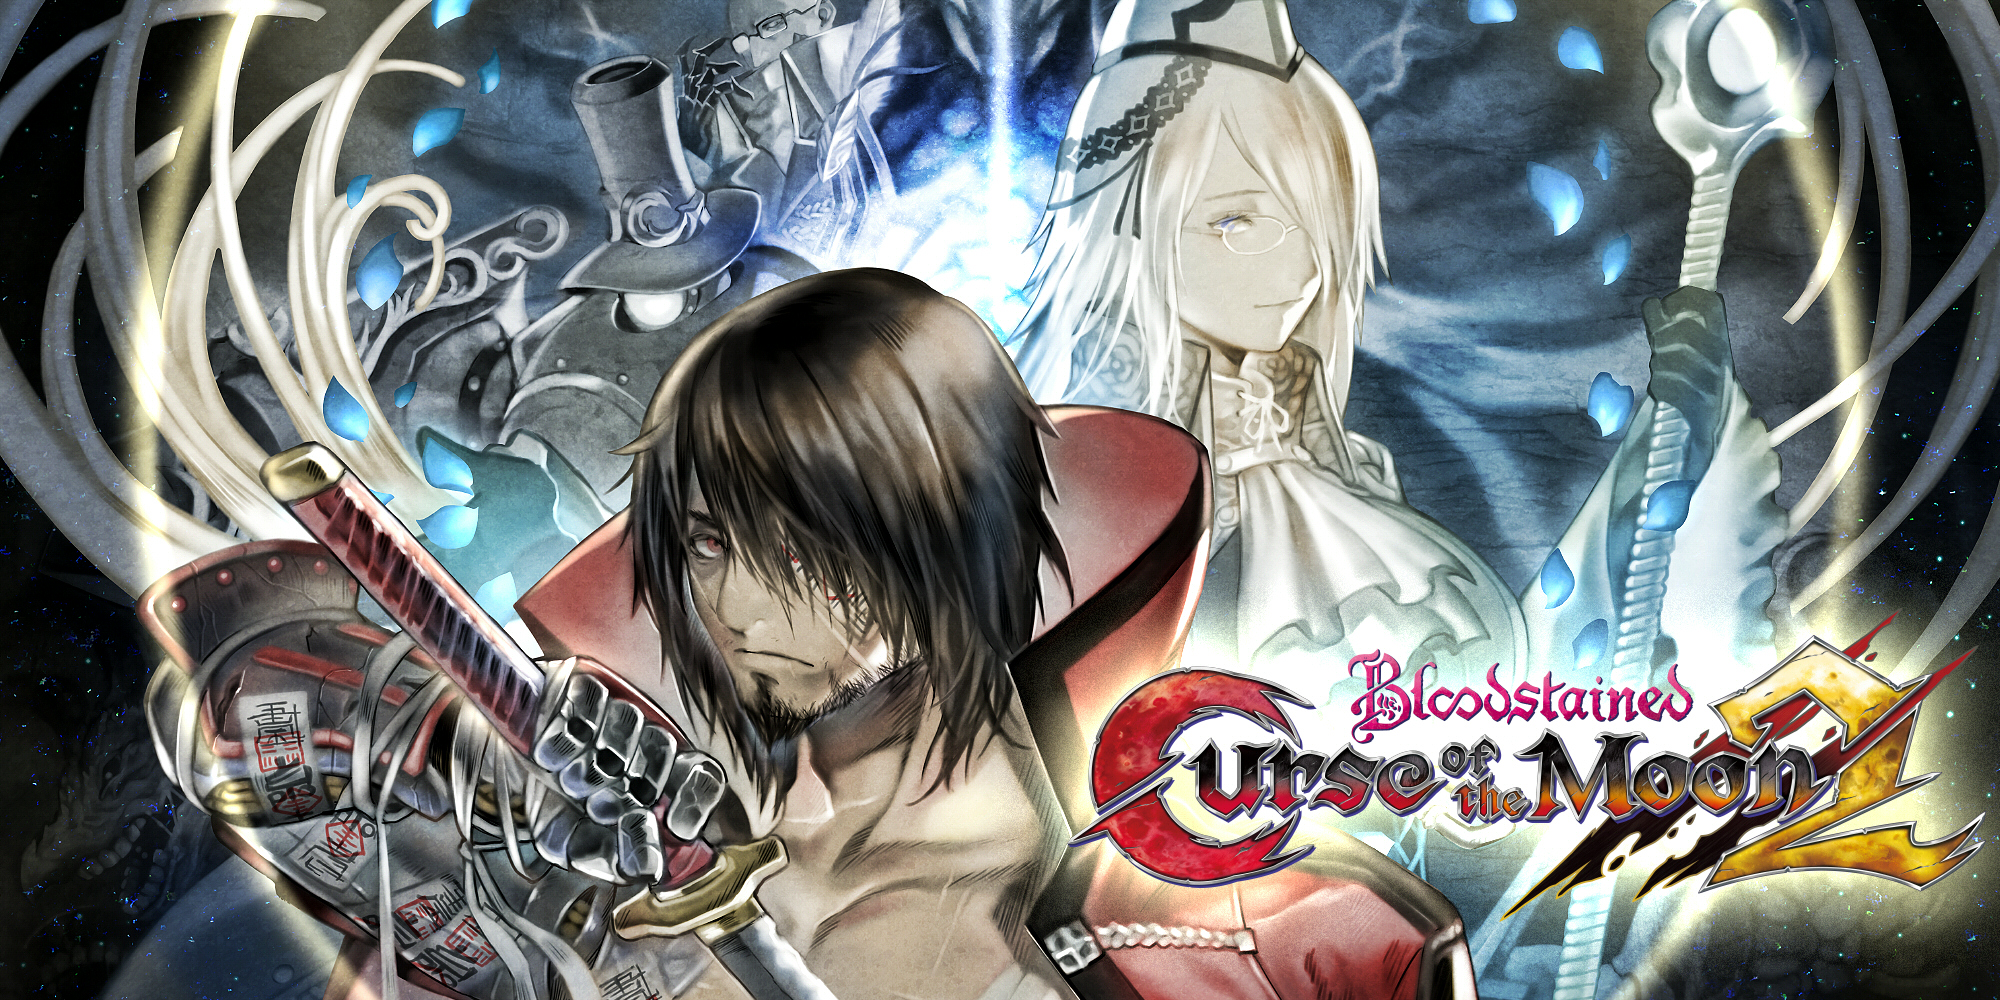 Download Bloodstained Curse of the Moon 2-3DM